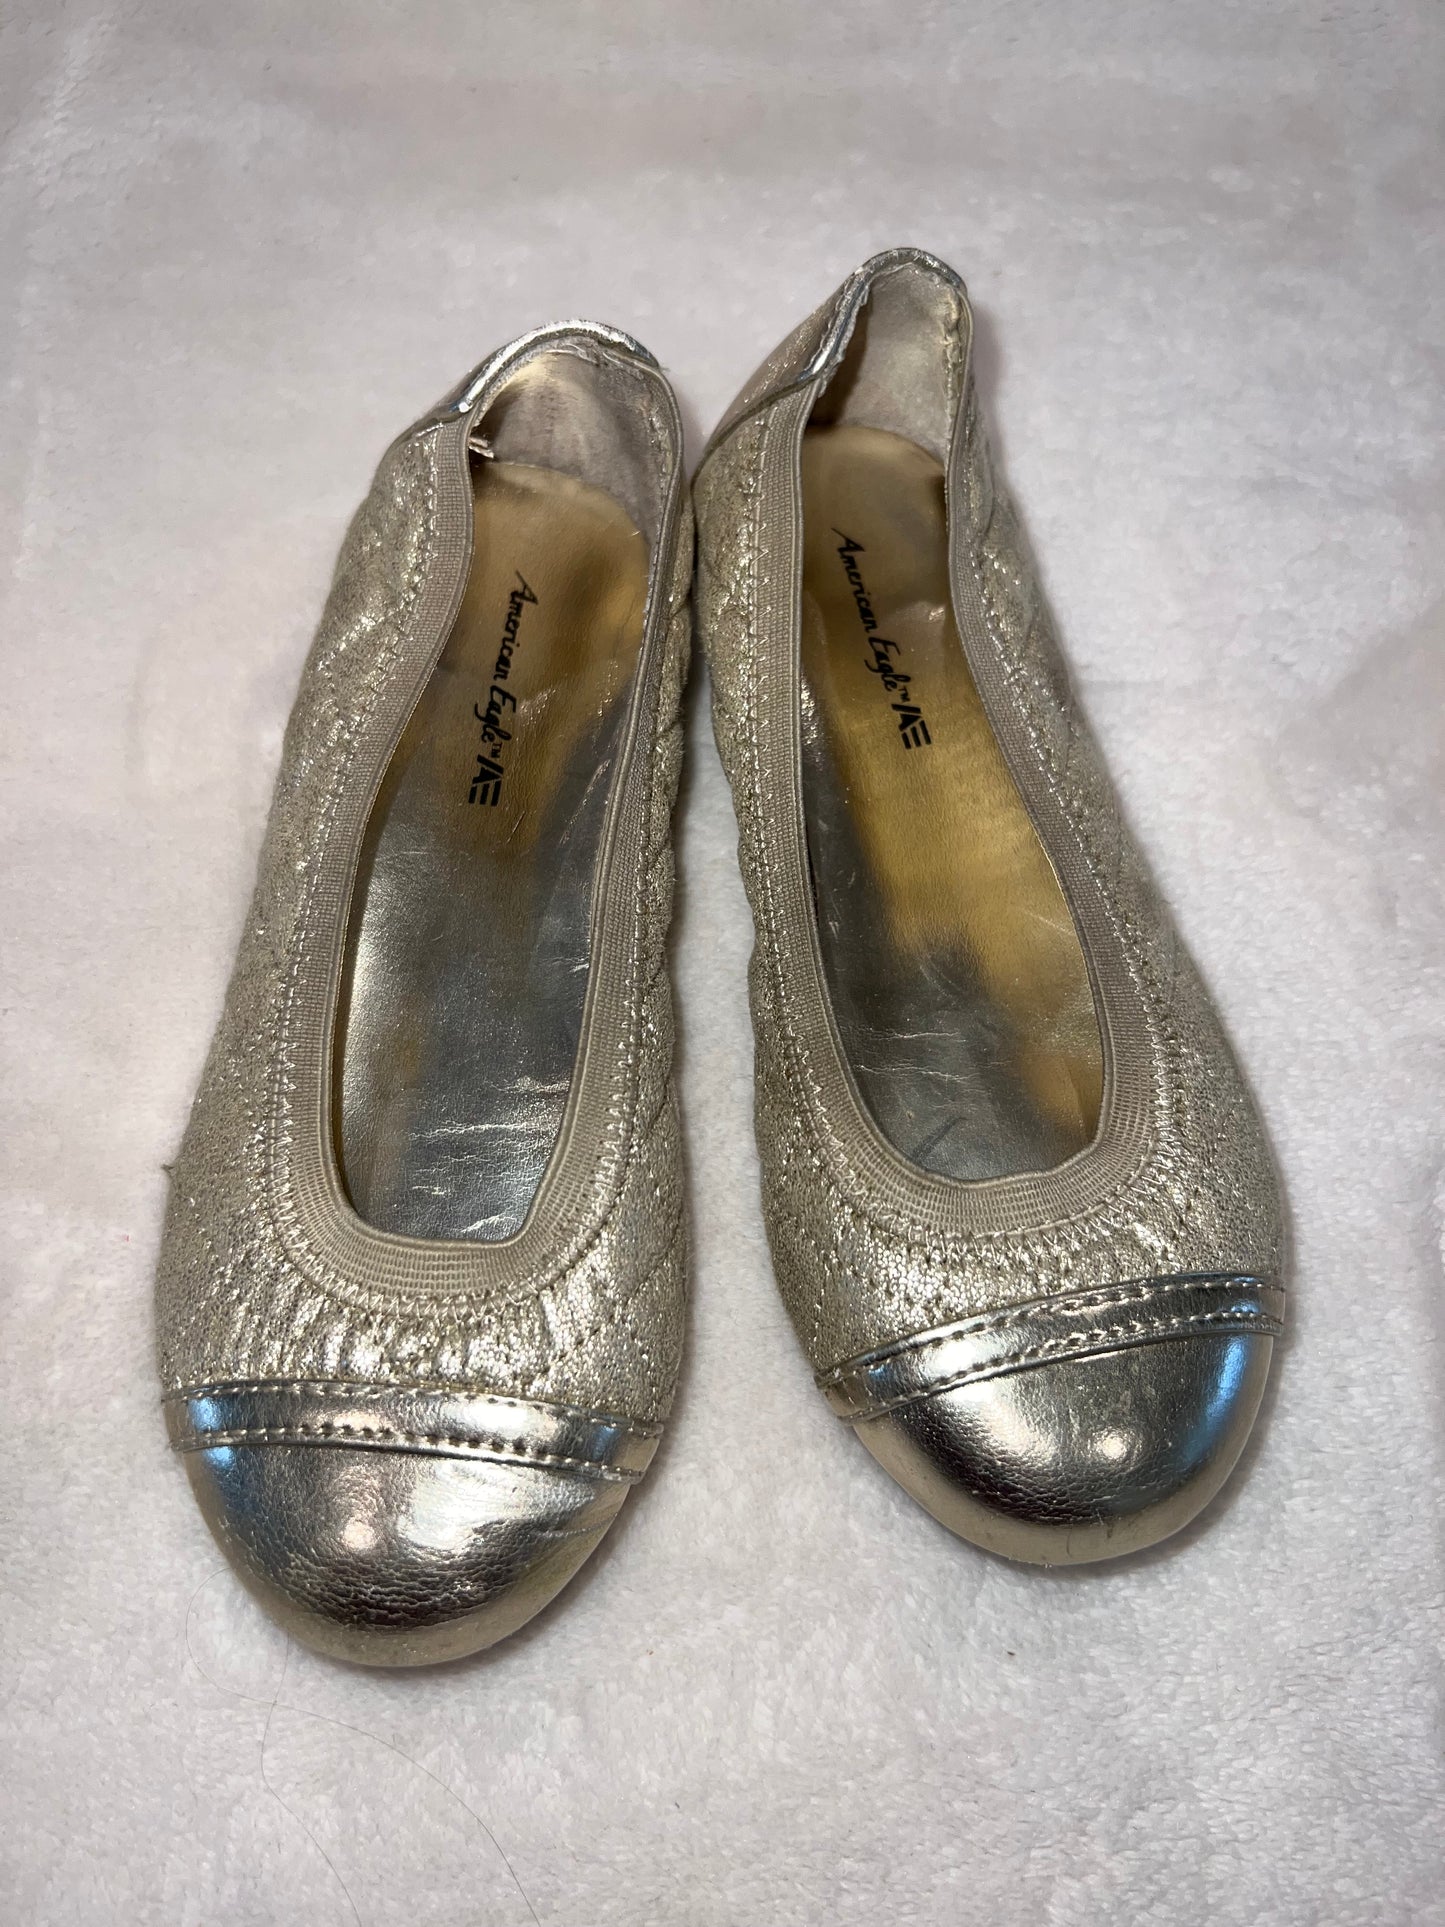 Toddler girl shoe size 11 american eagle gold flats